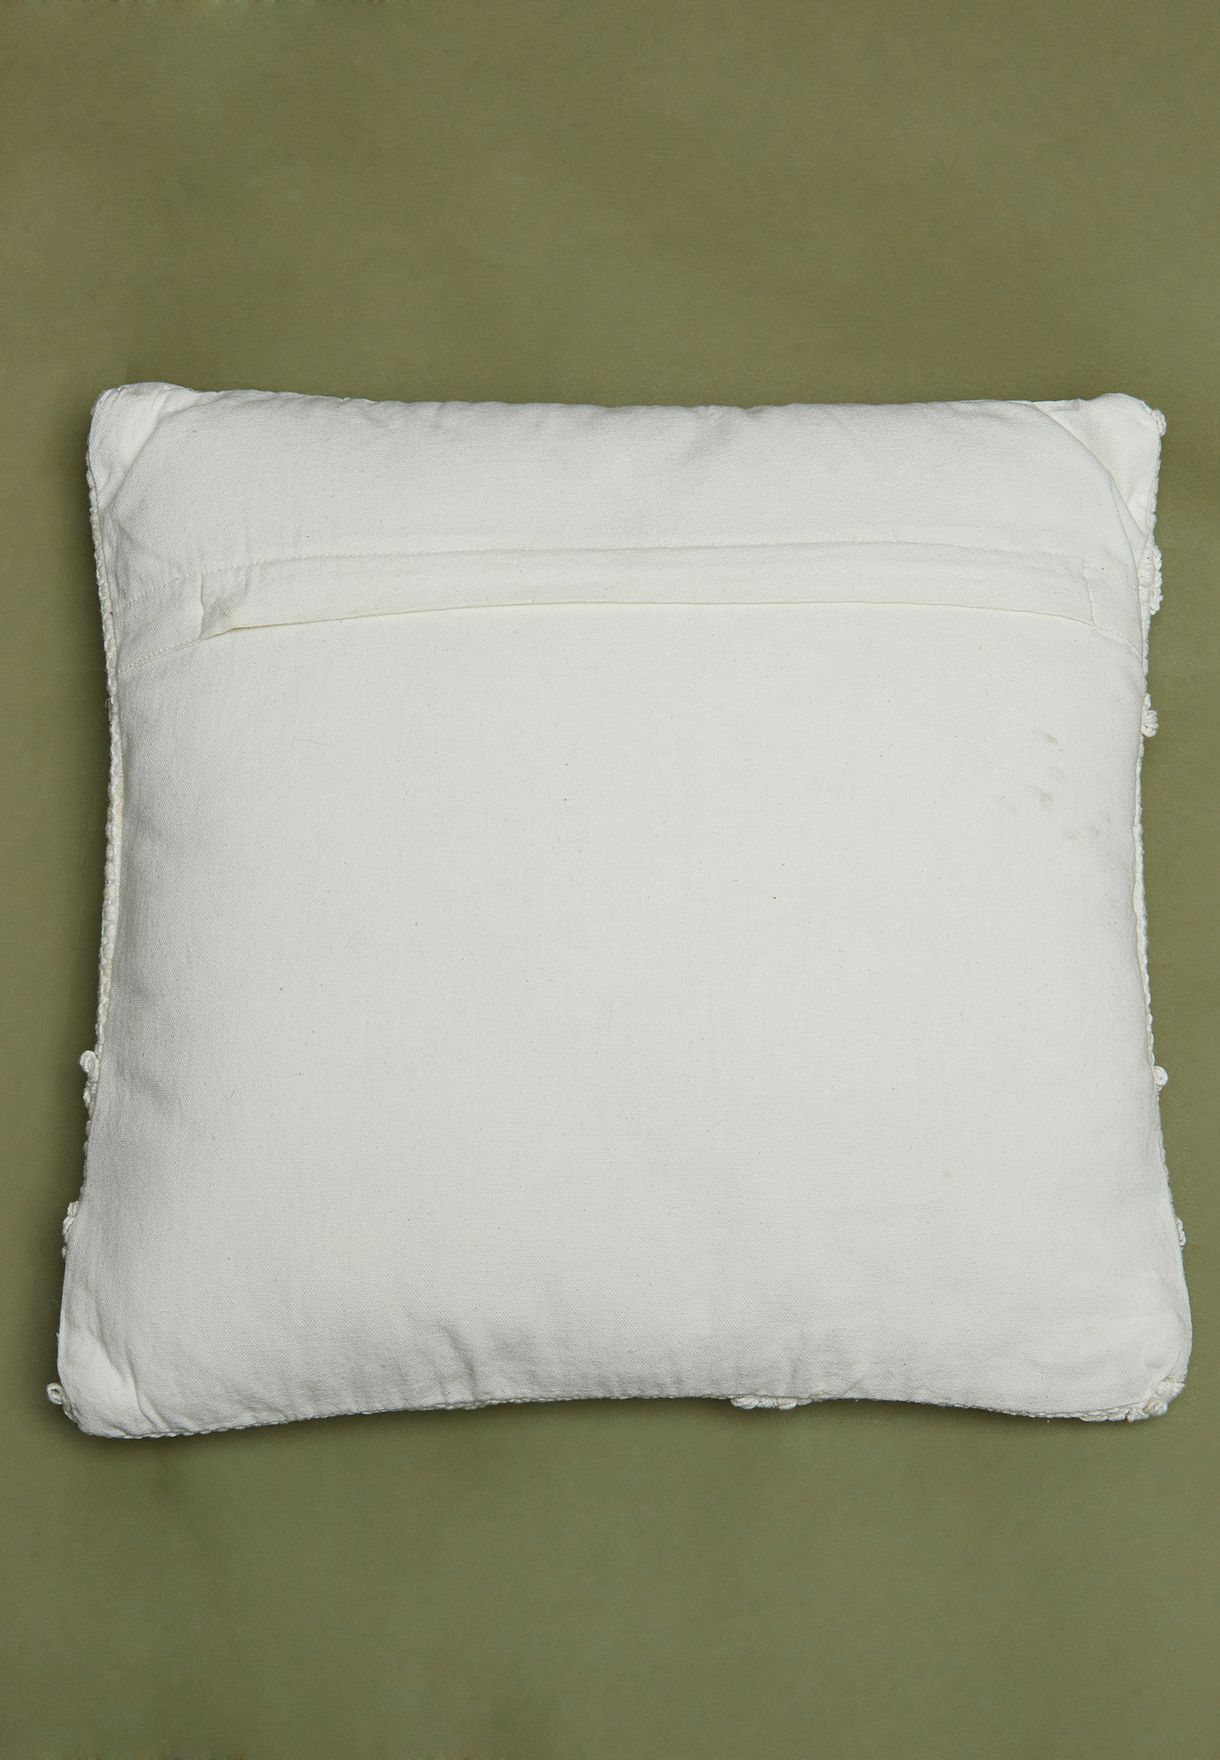 Turfted Cushion With Insert 16X16"